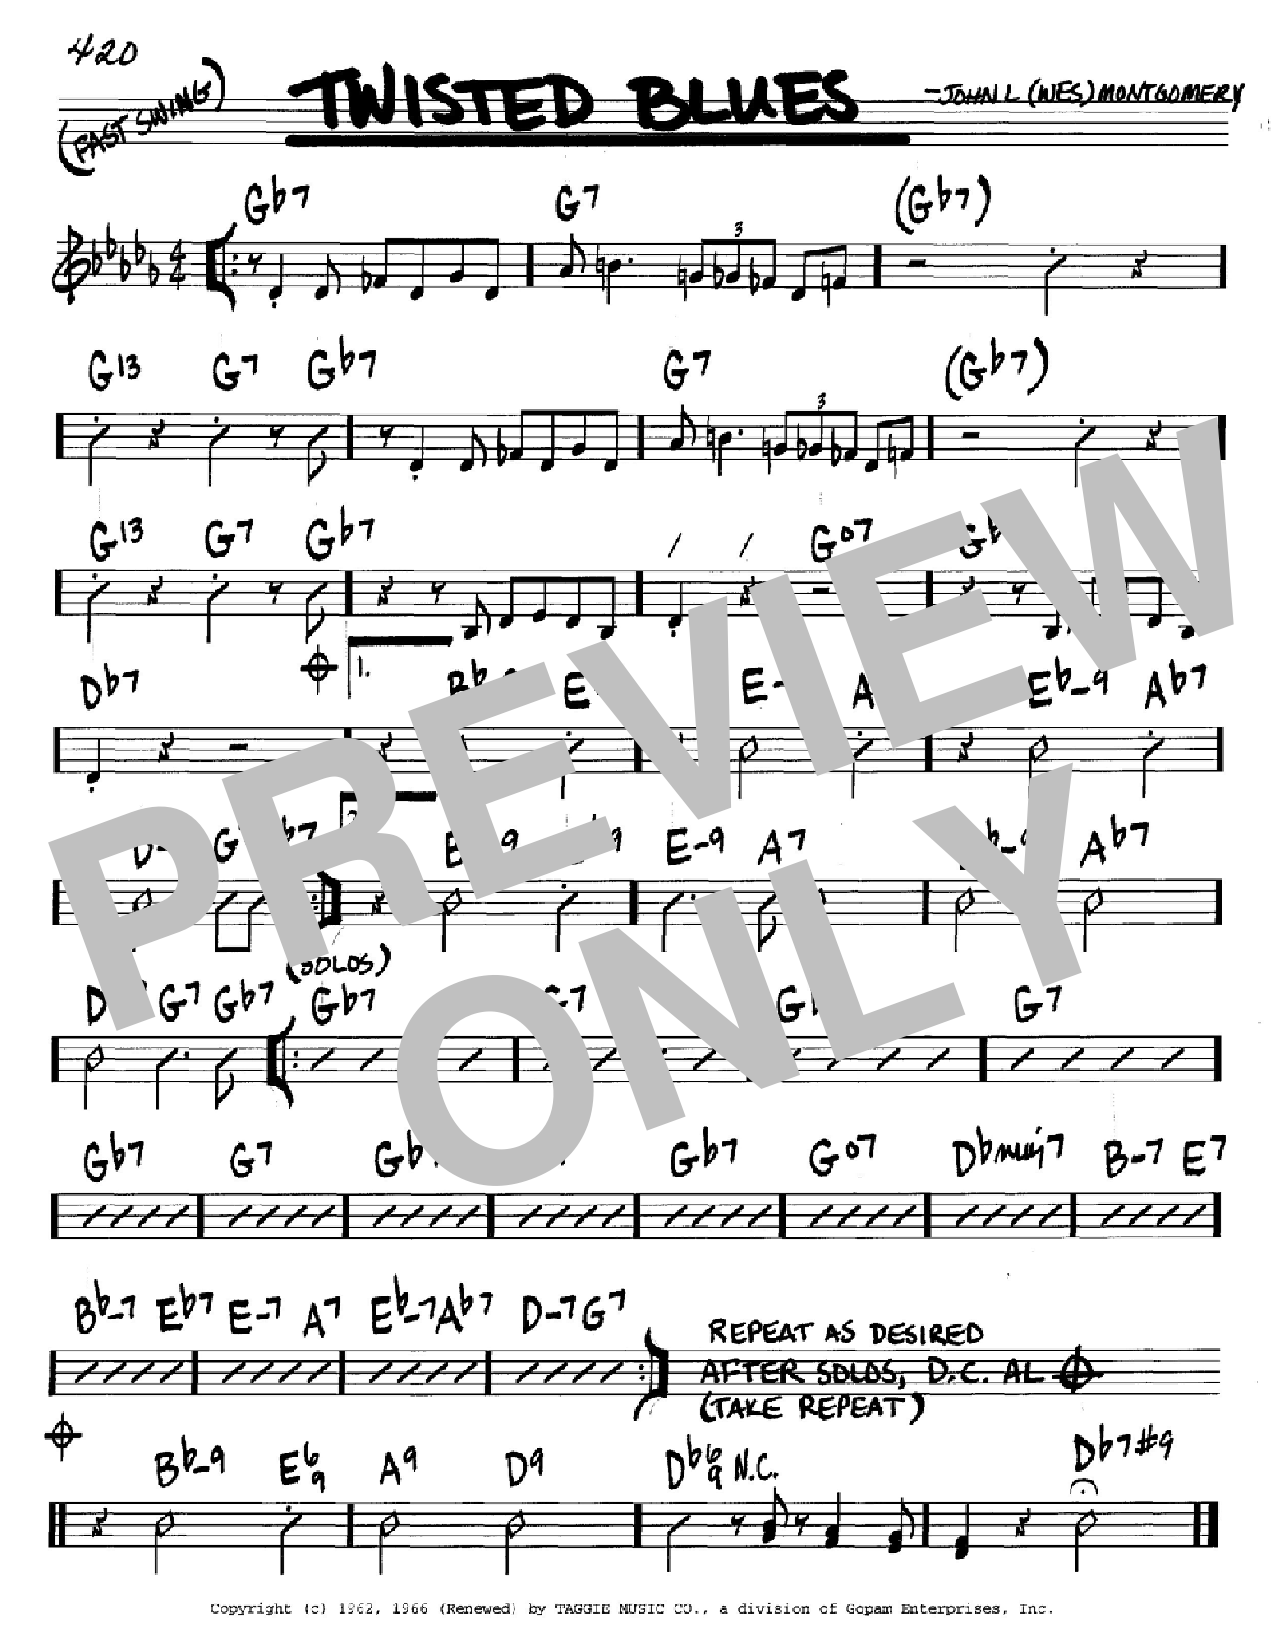 Wes Montgomery Twisted Blues sheet music notes and chords. Download Printable PDF.